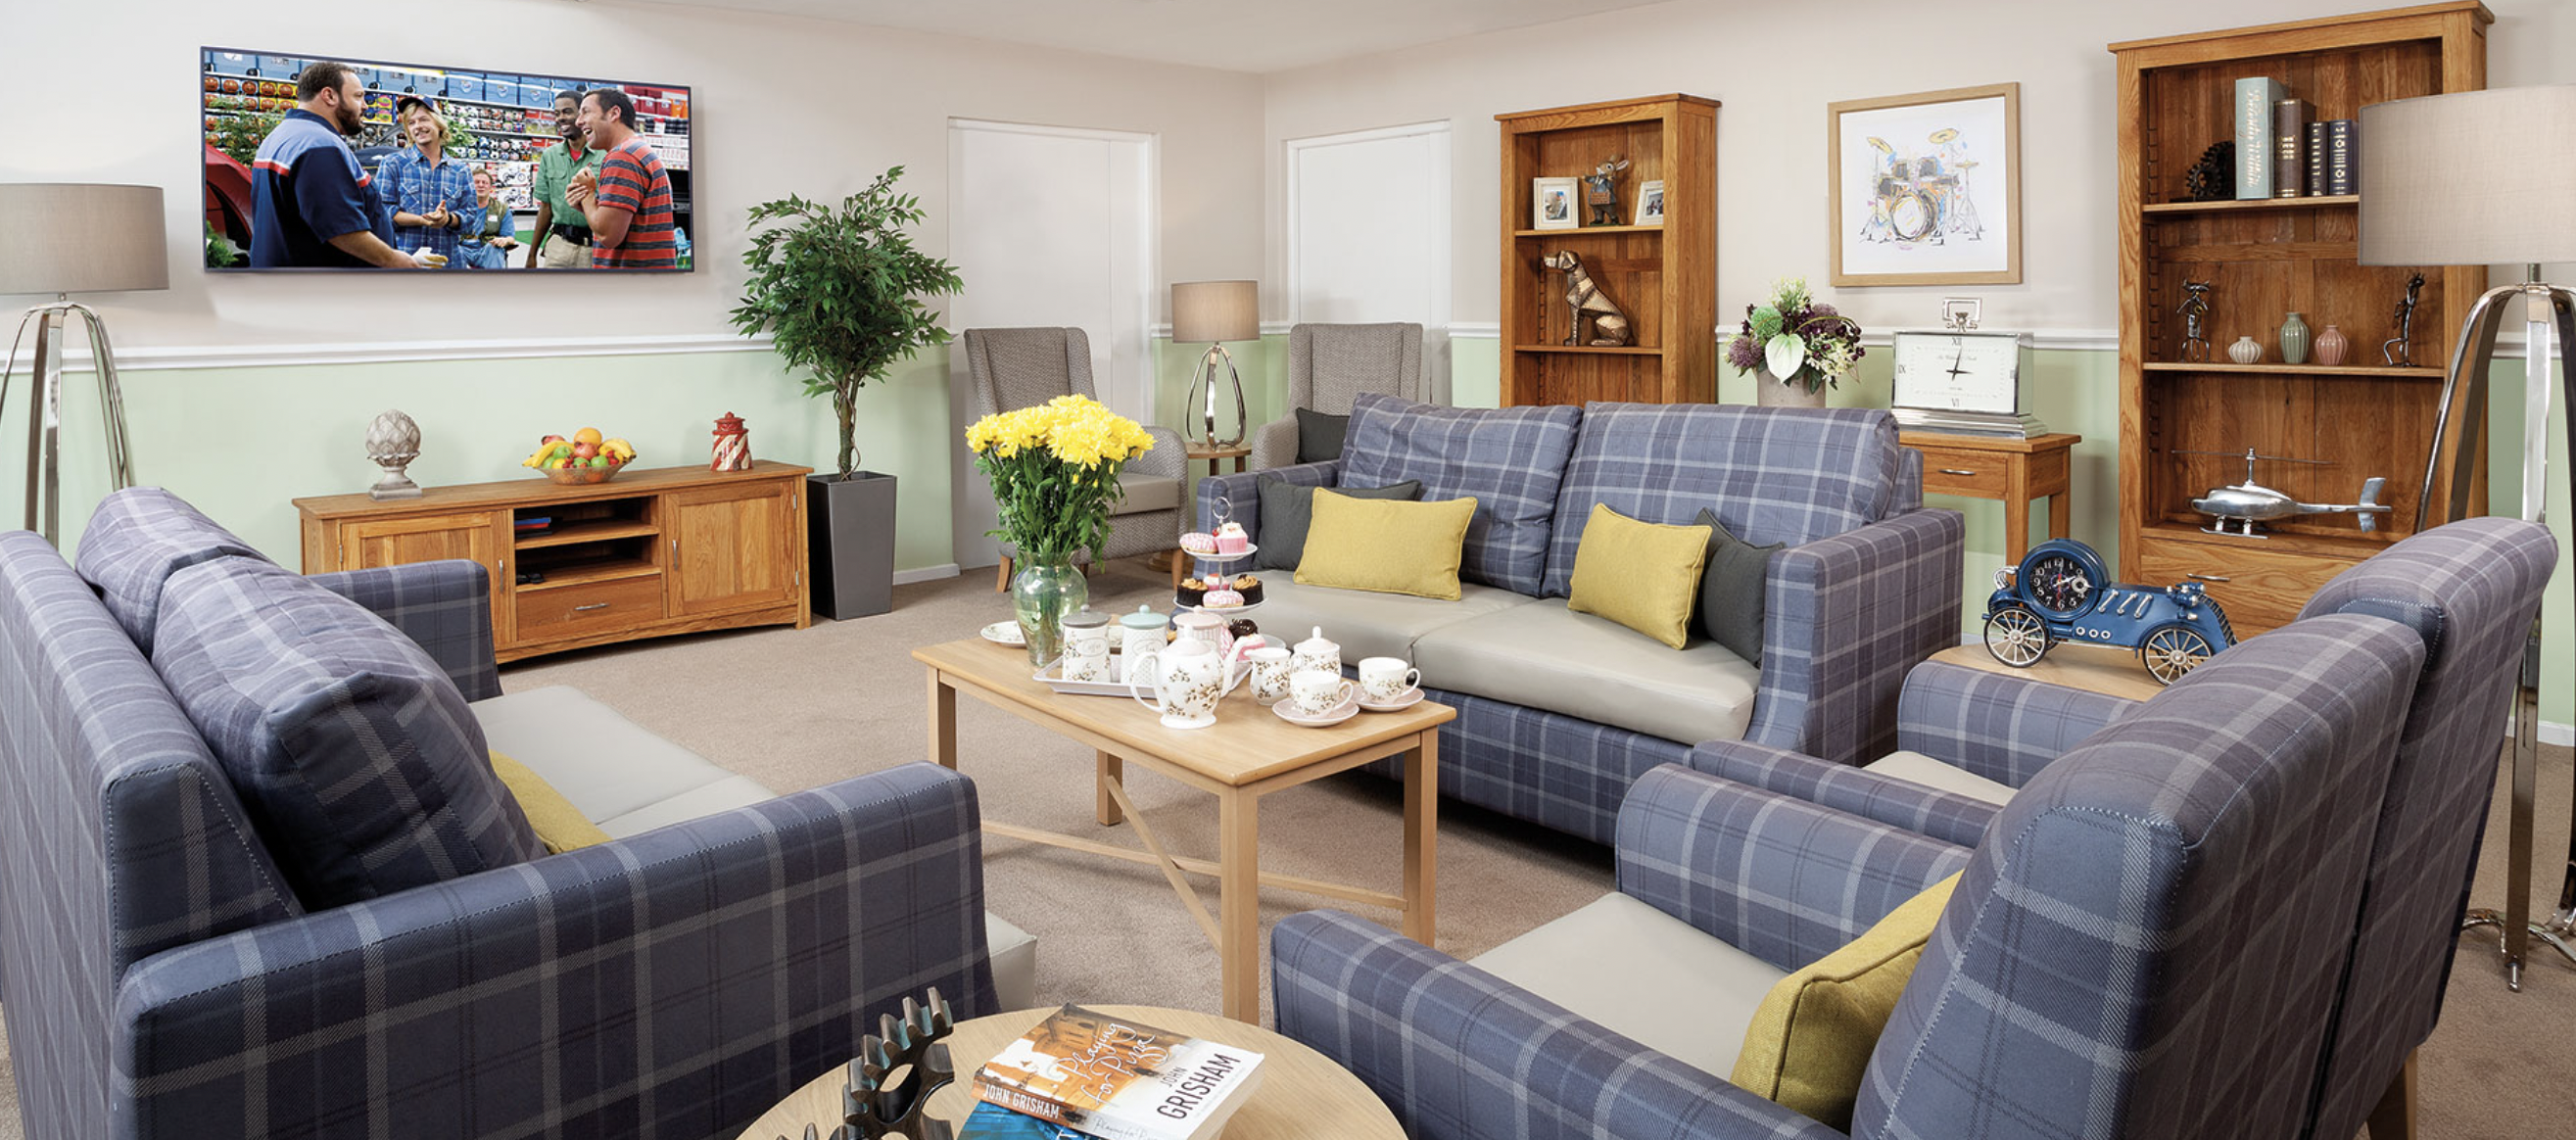 The lounge area at Wrottesley Park House Care Home in Wolverhampton, West Midlands